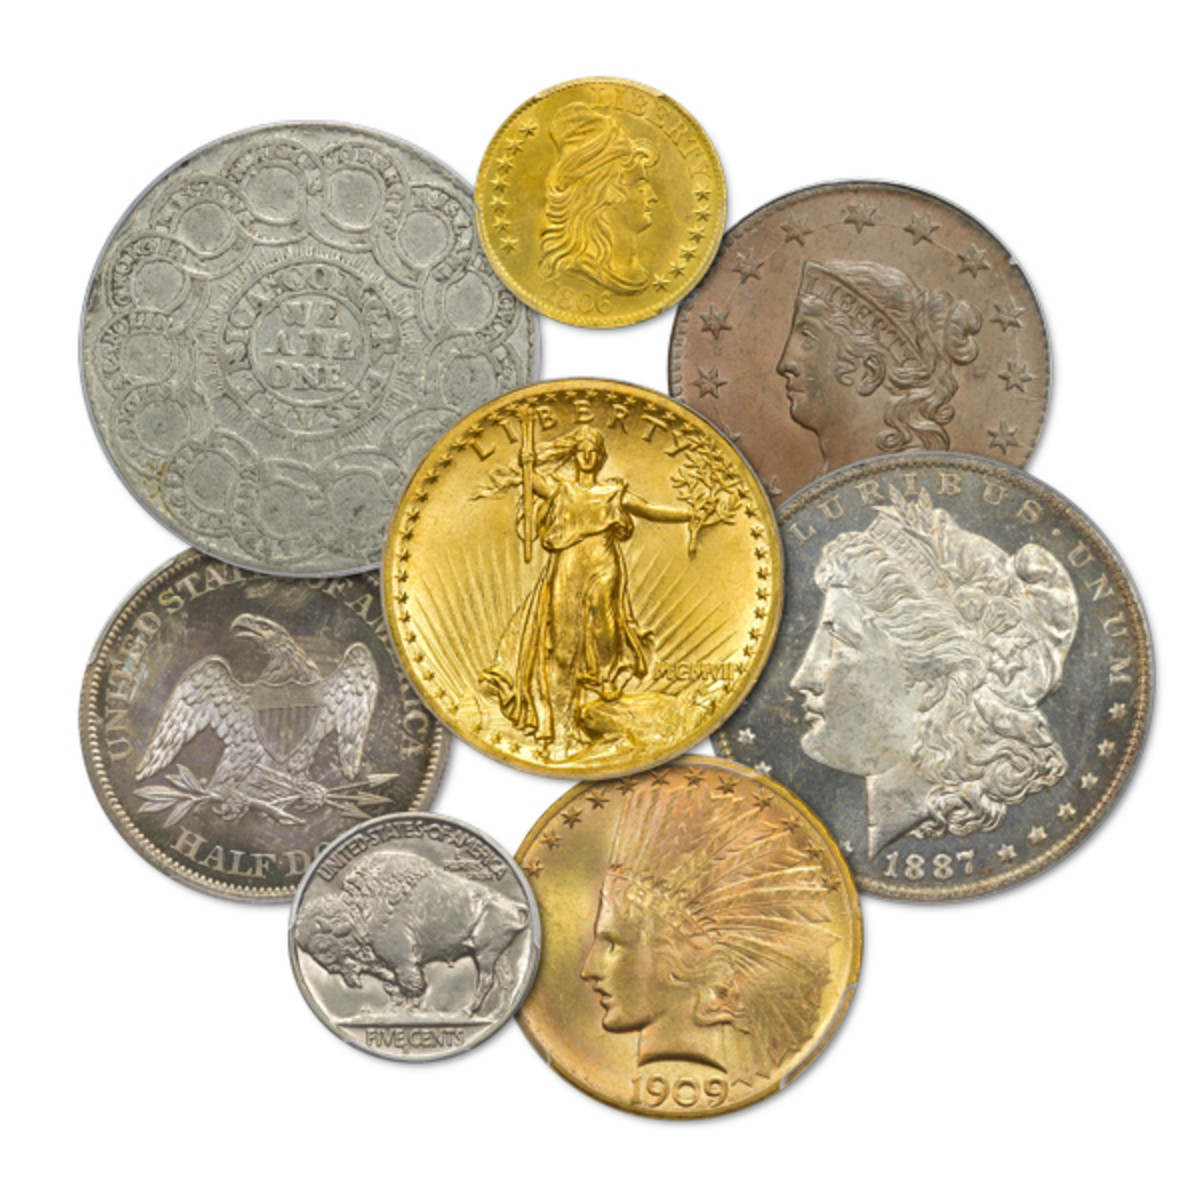 All News is Good News for Coins - Numismatic News